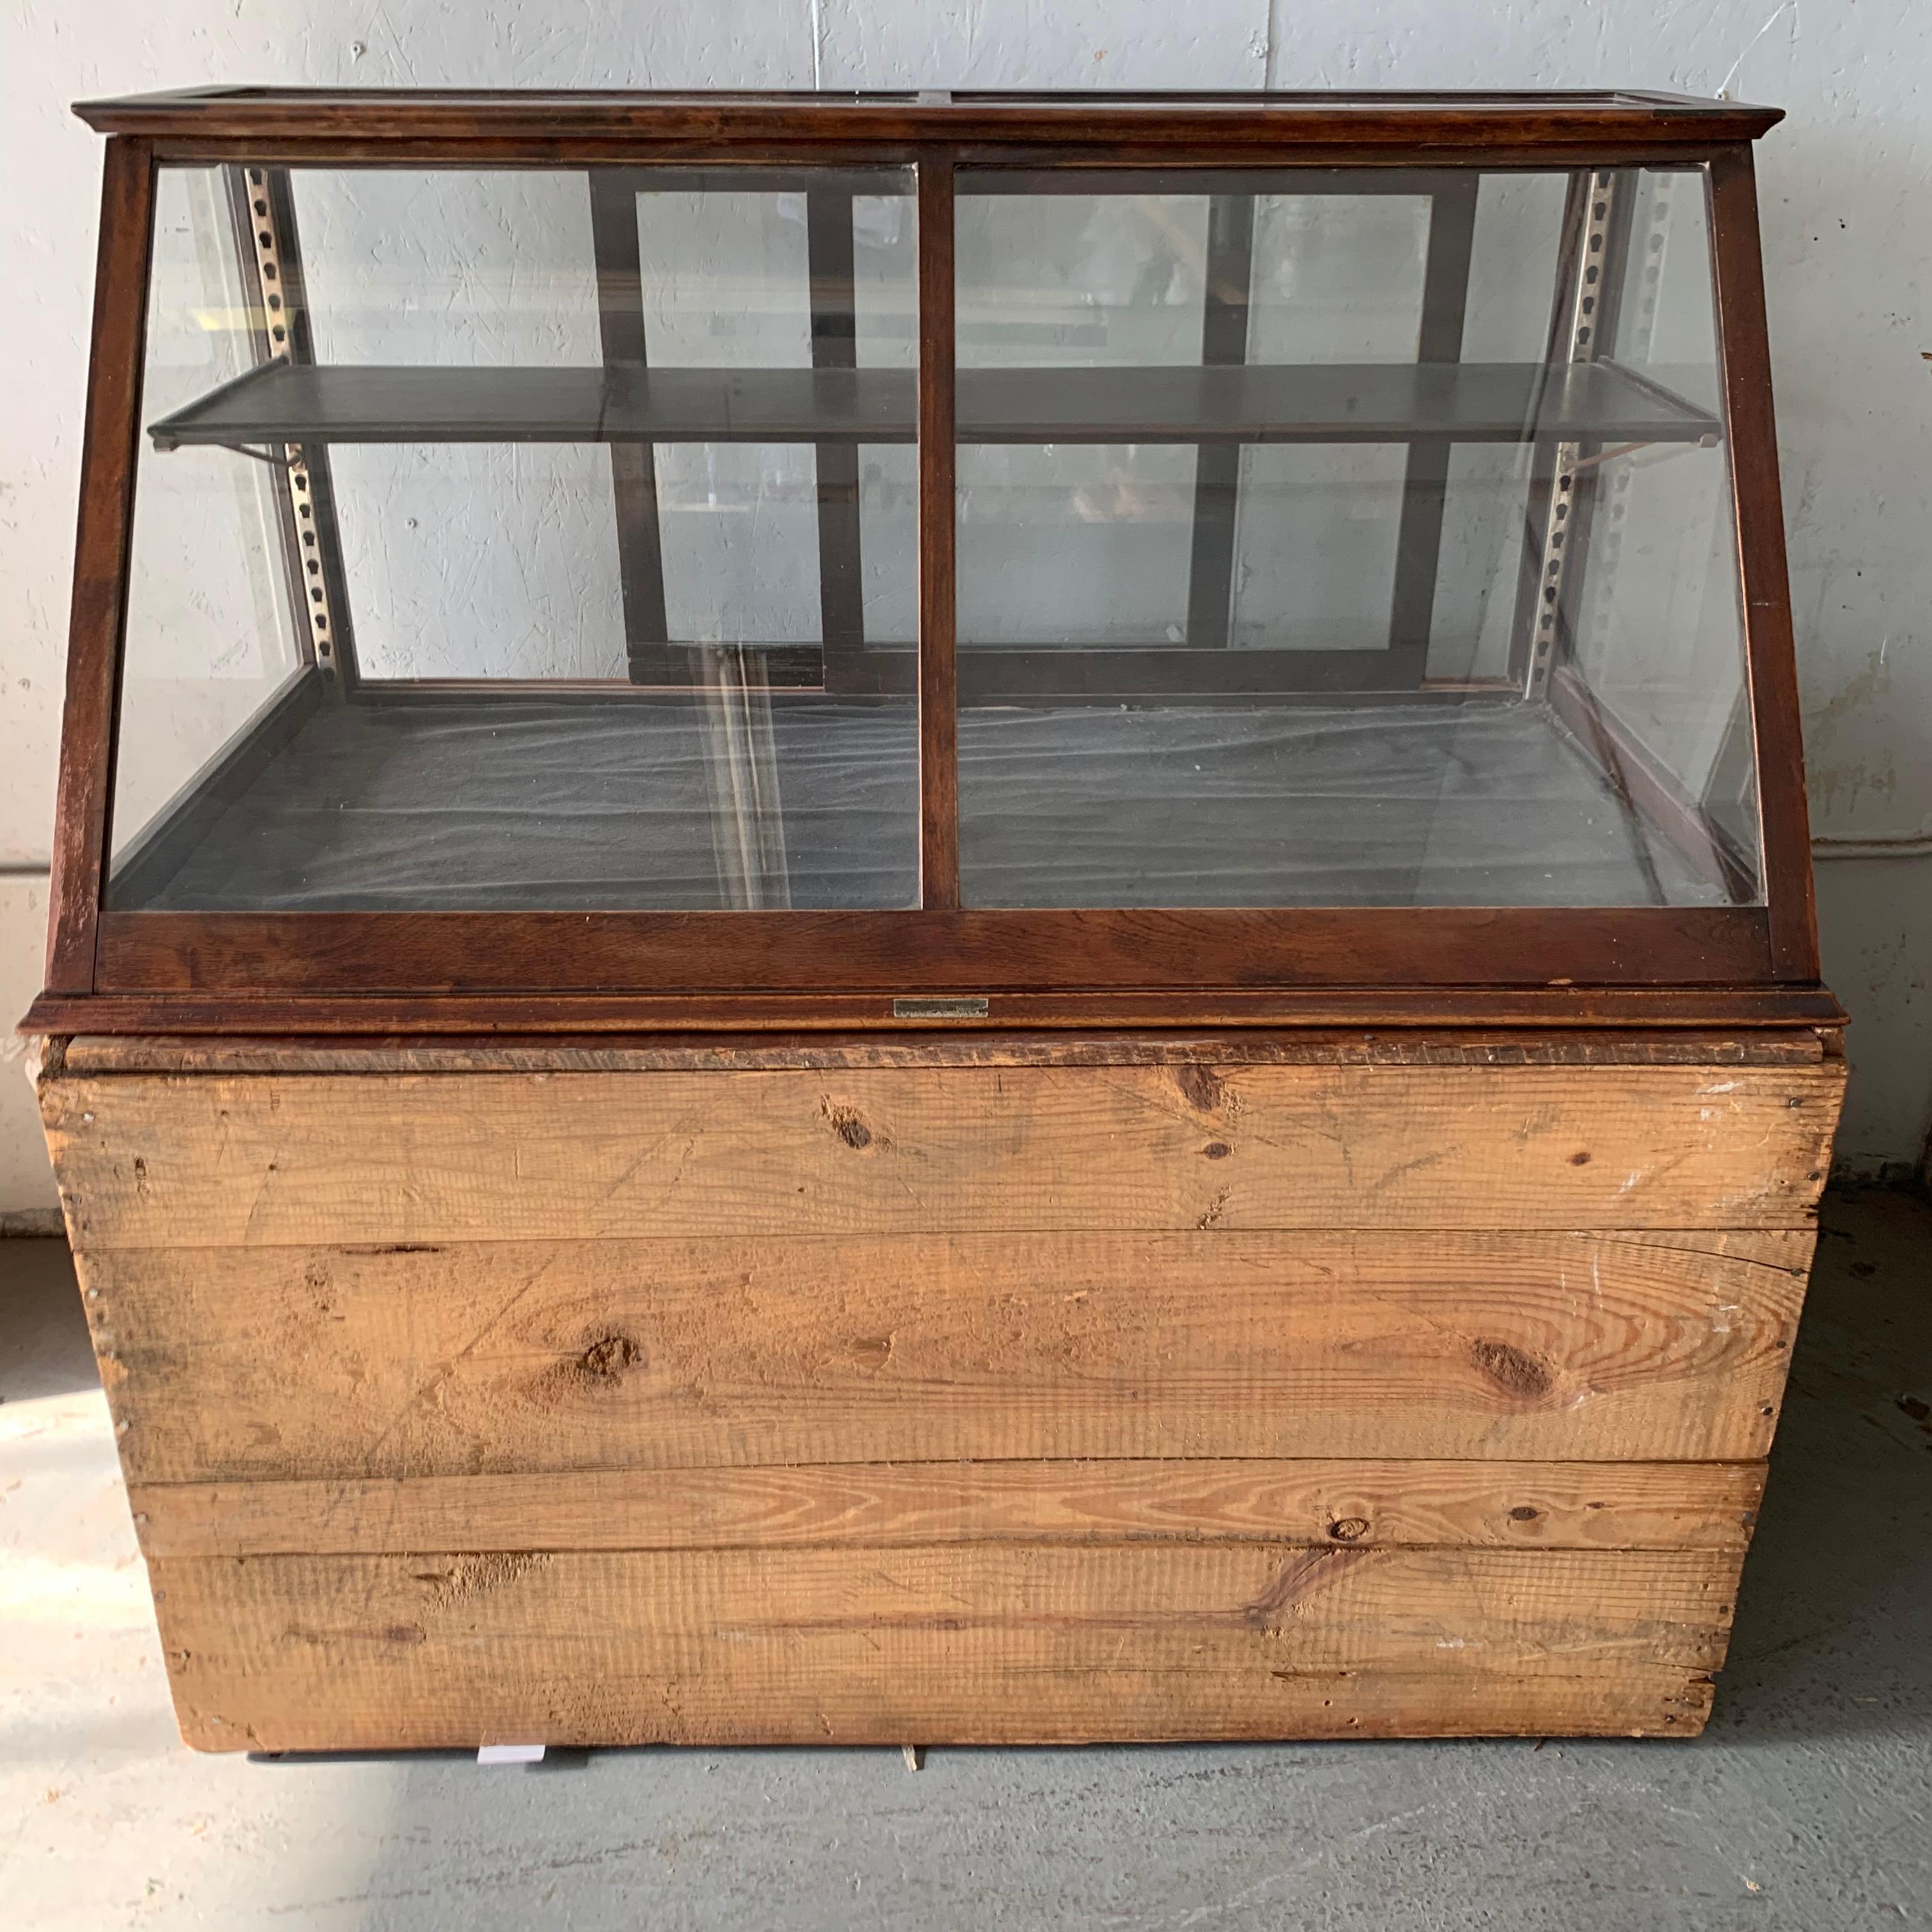 Antique One-Tier Wooden Tabletop Store Display Cabinet By Waddell Company, Ohio 7